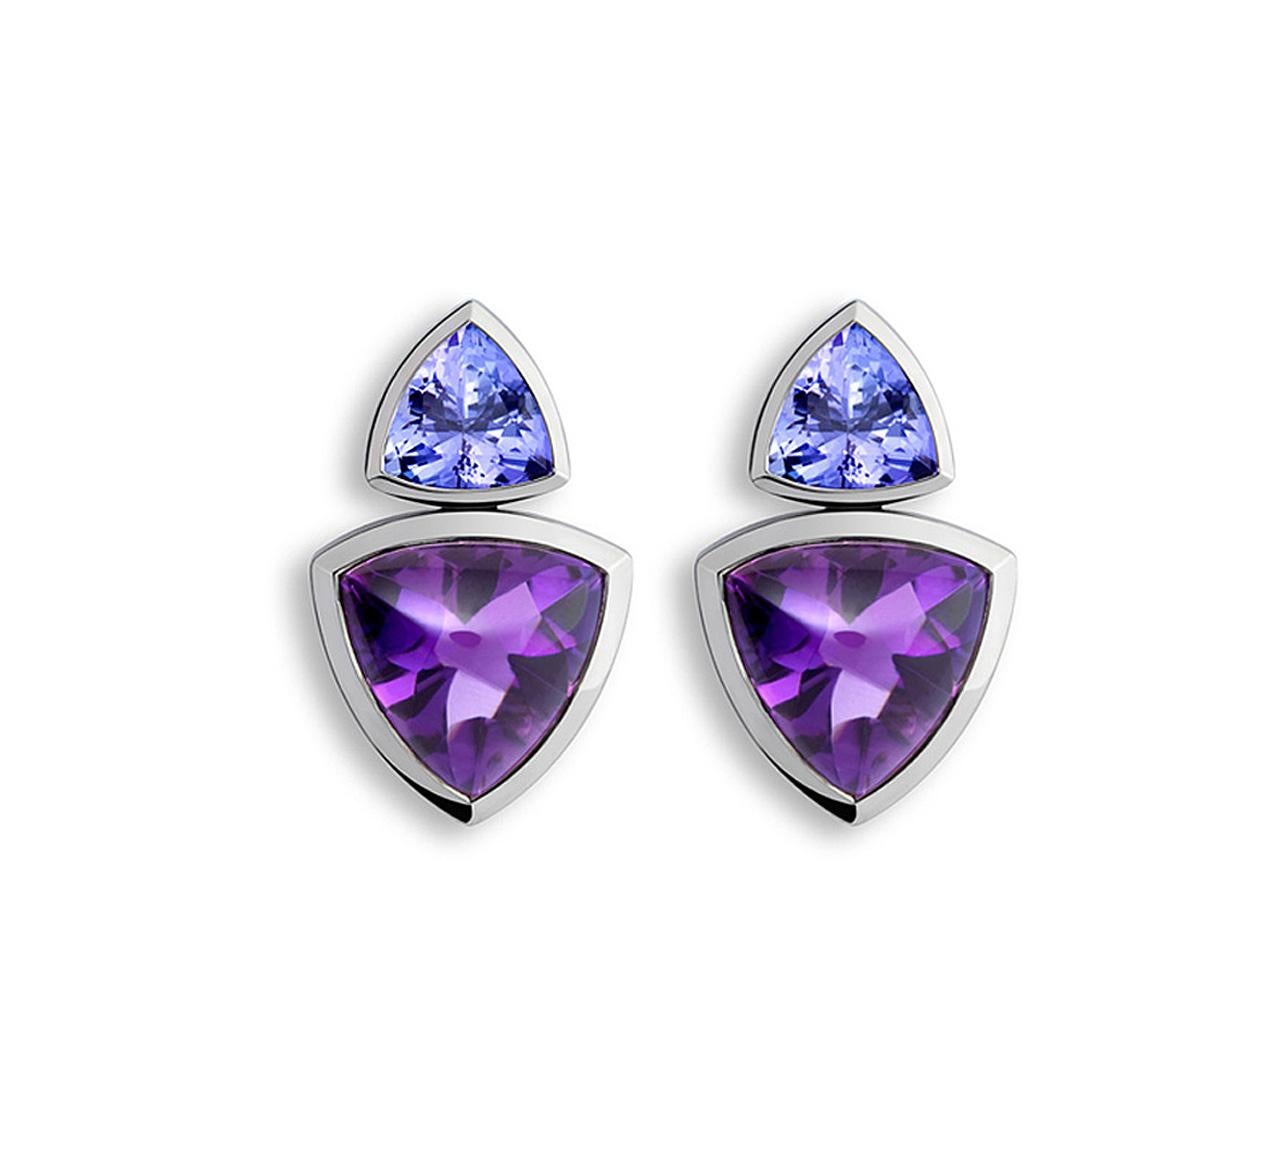 Earrings in 18k white gold with two tanzanite 3.81 ct and two amethyst 15.24 ct.
Designed by Colleen B. Rosenblat
